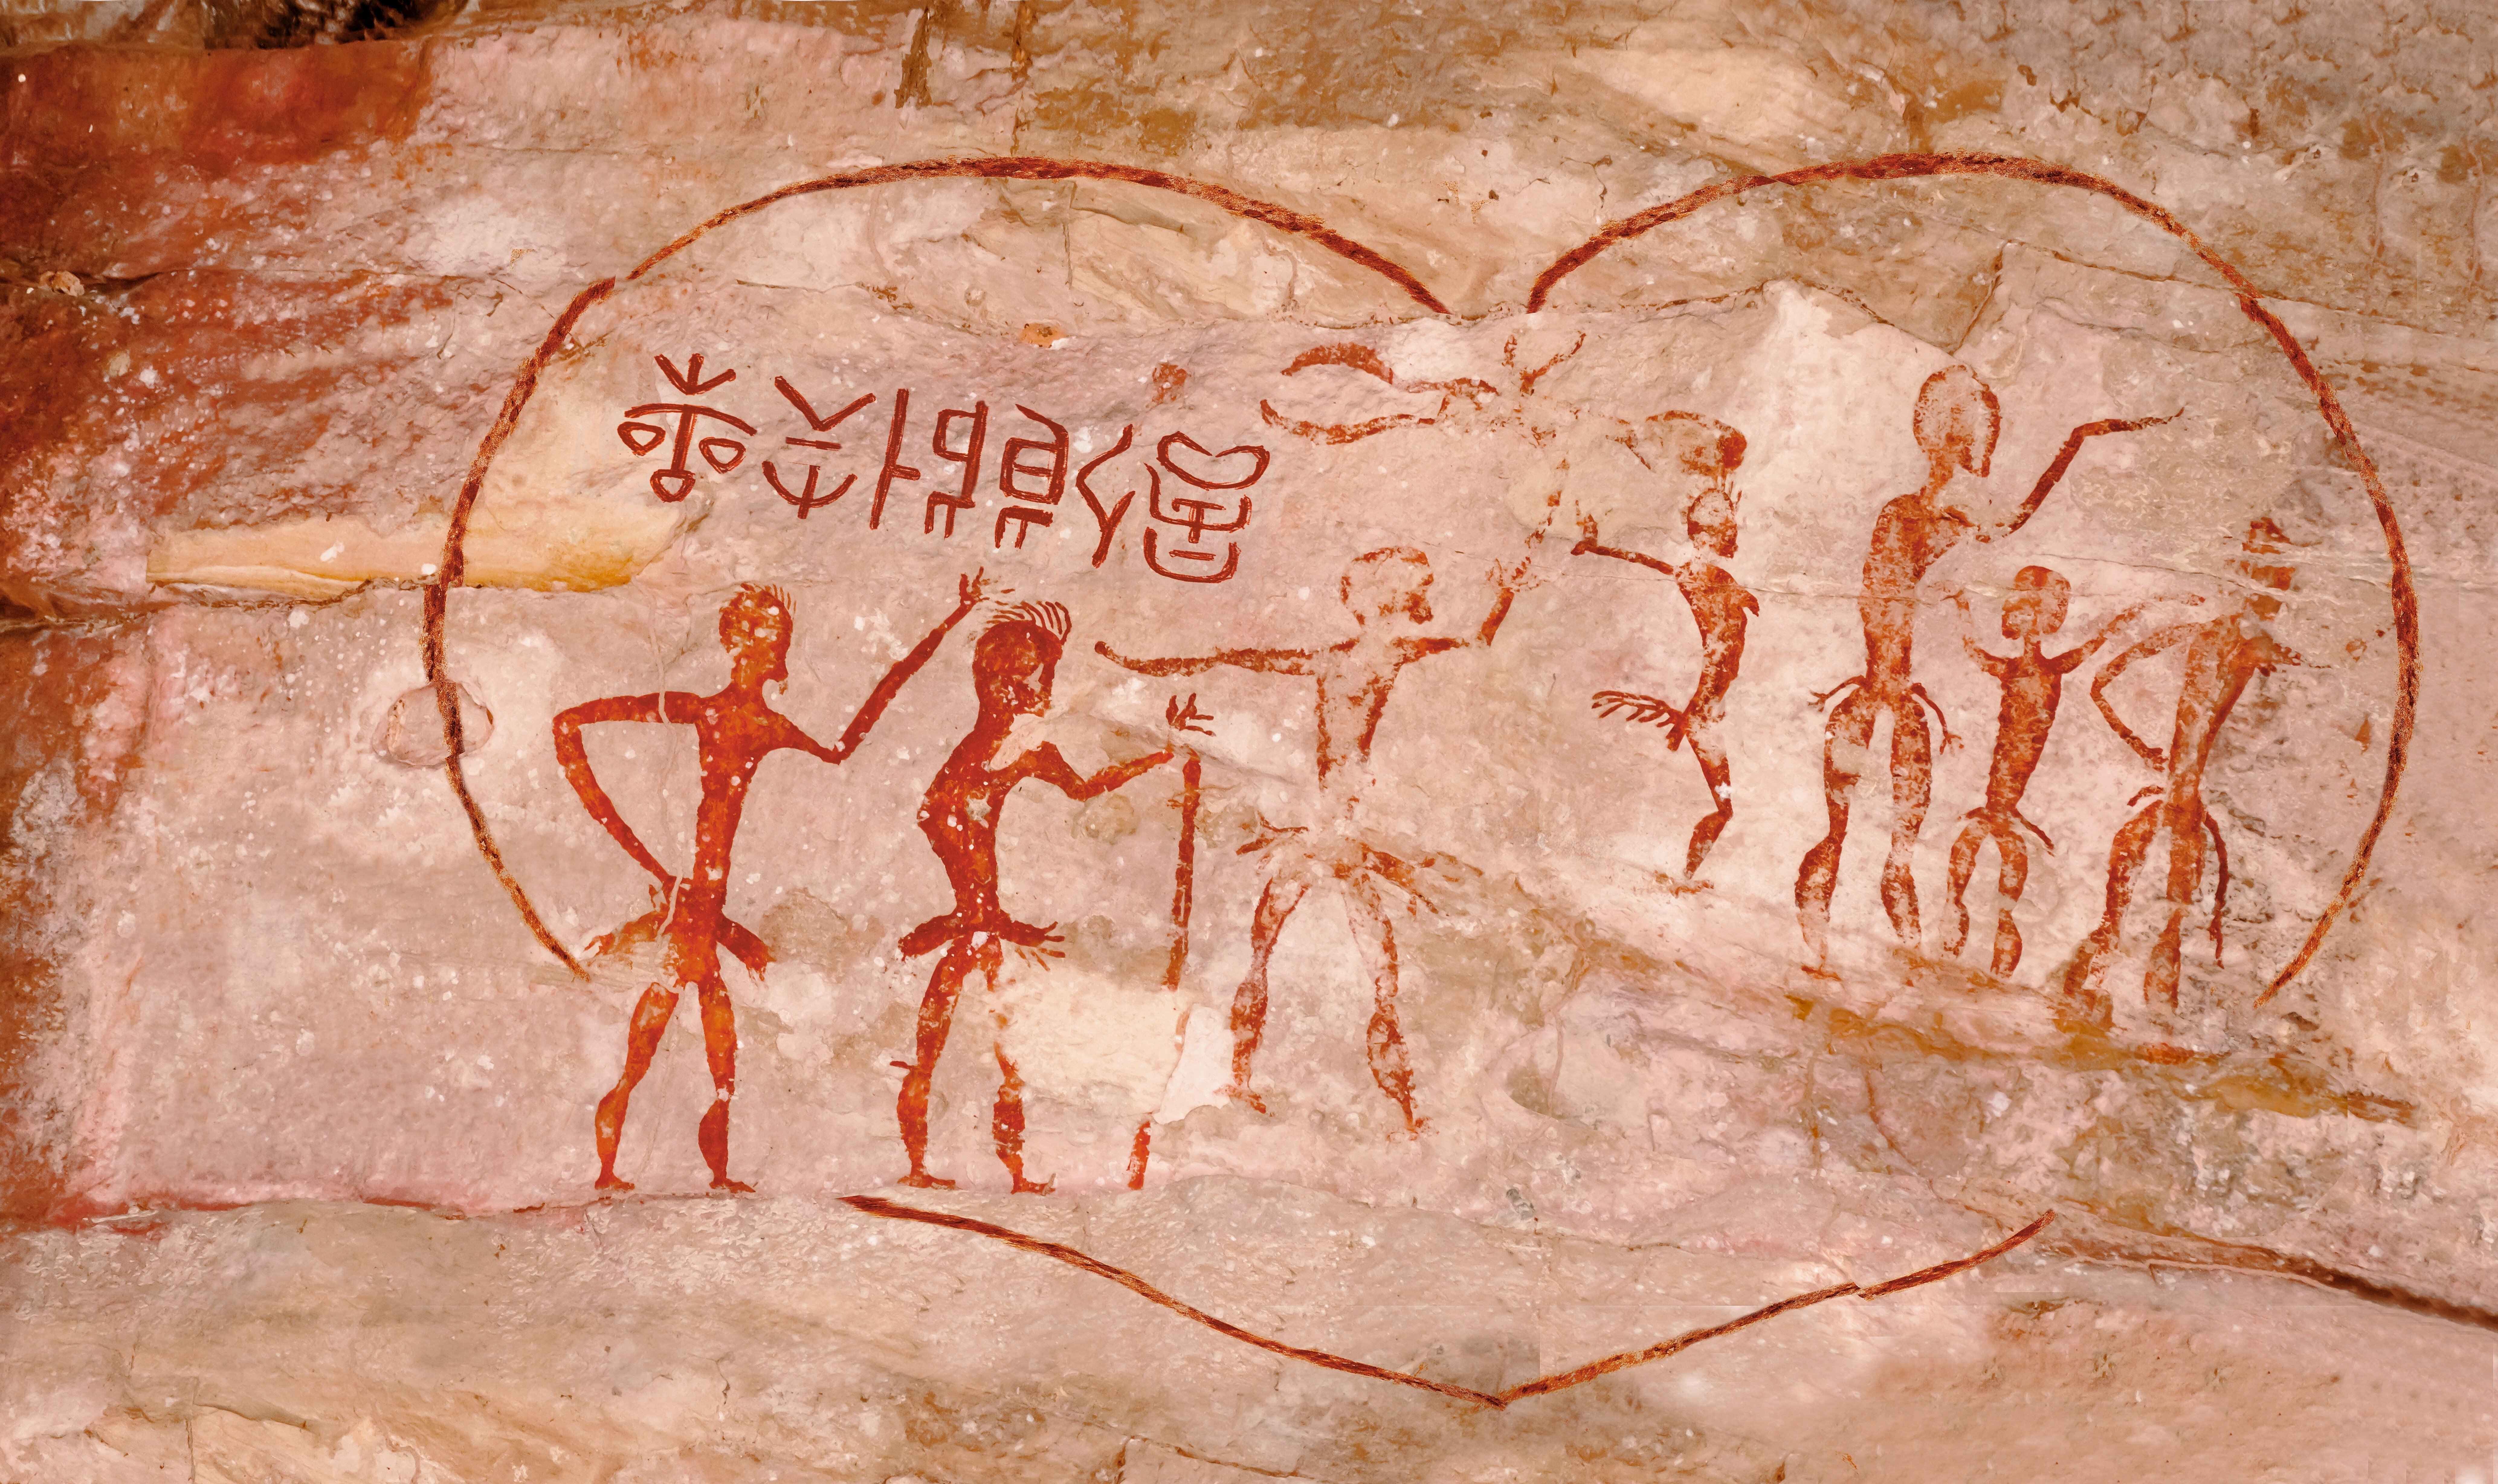 Archaeologists believe the seven individuals in the cave painting are performing, and could represent a psychic’s vision of the future